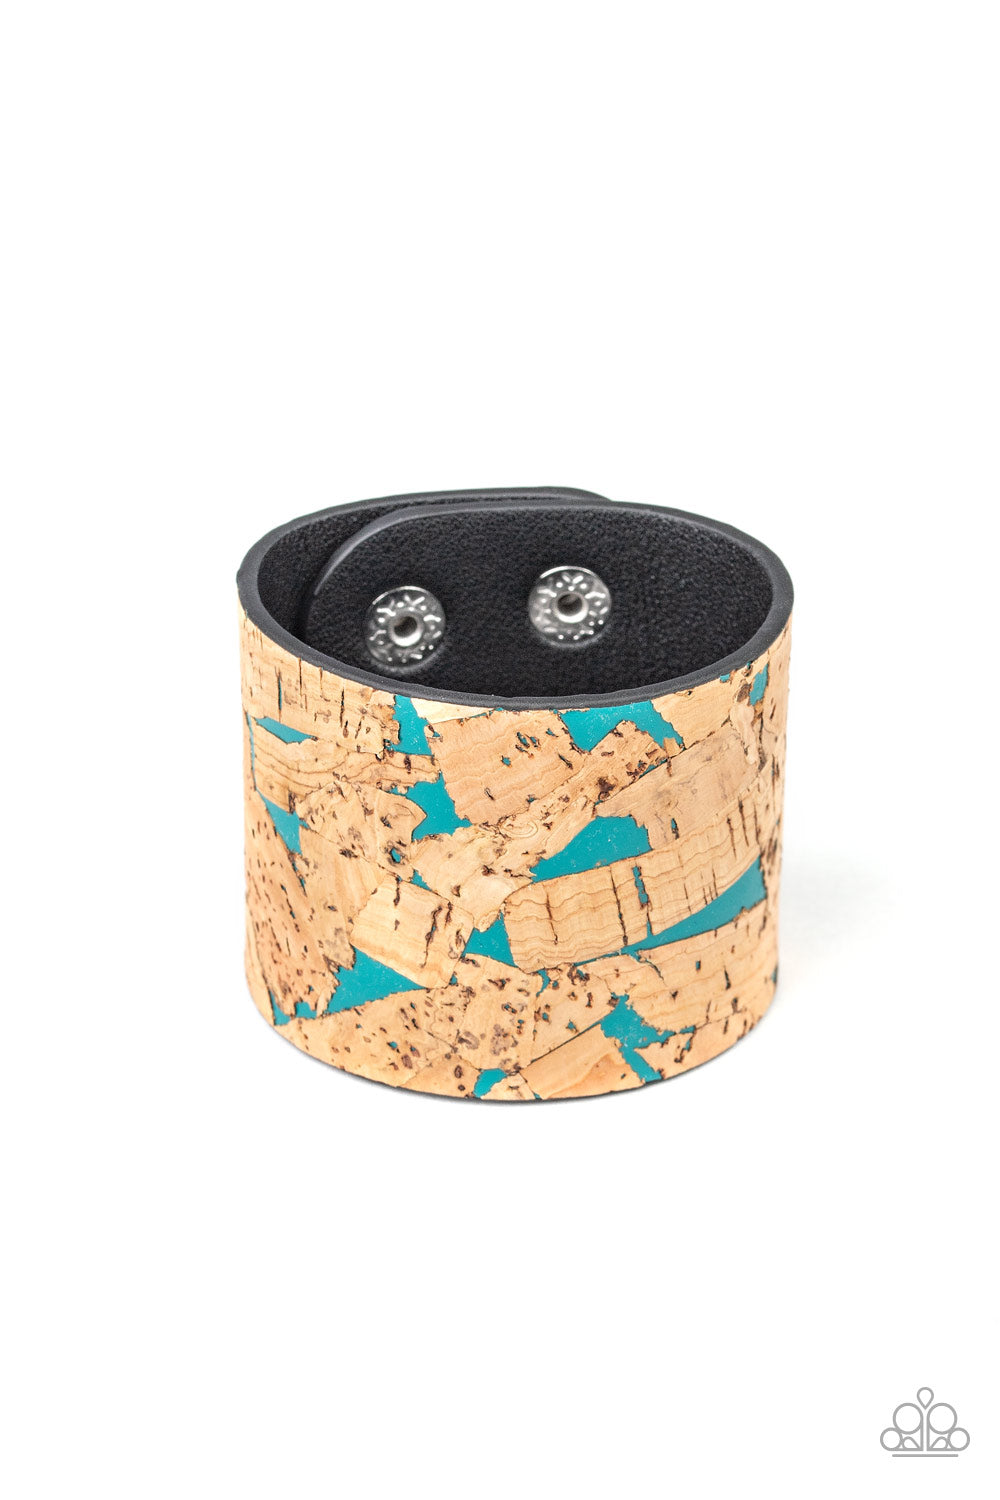 Cork Congo Blue Wrap Bracelet - Paparazzi Accessories Pieces of cork have been plastered across the front of a blue leather band, creating an earthy look around the wrist. Features an adjustable snap closure. Sold as one individual bracelet.